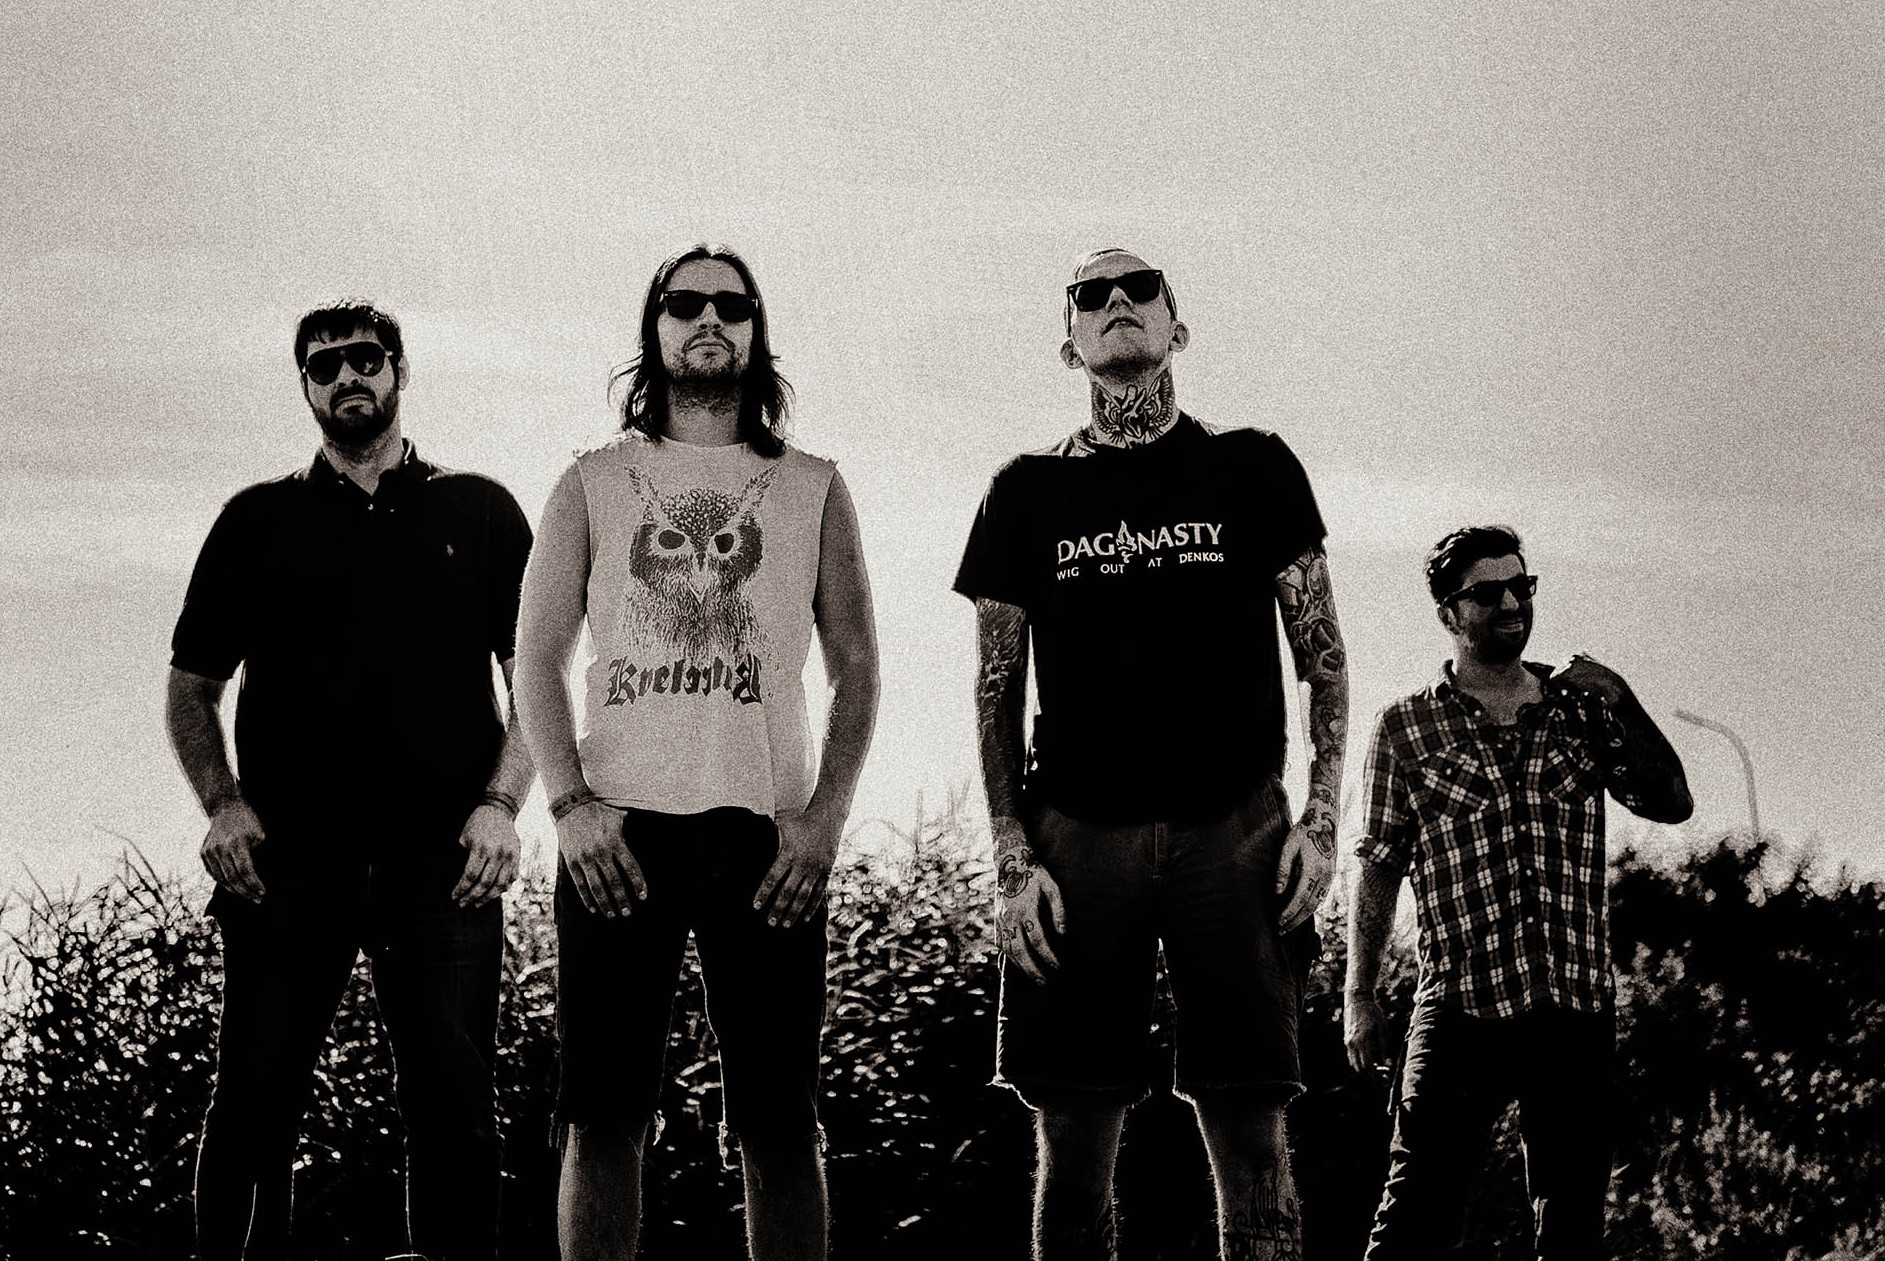 Converge announce new album ‘All We Love We Leave Behind’ out October 12th